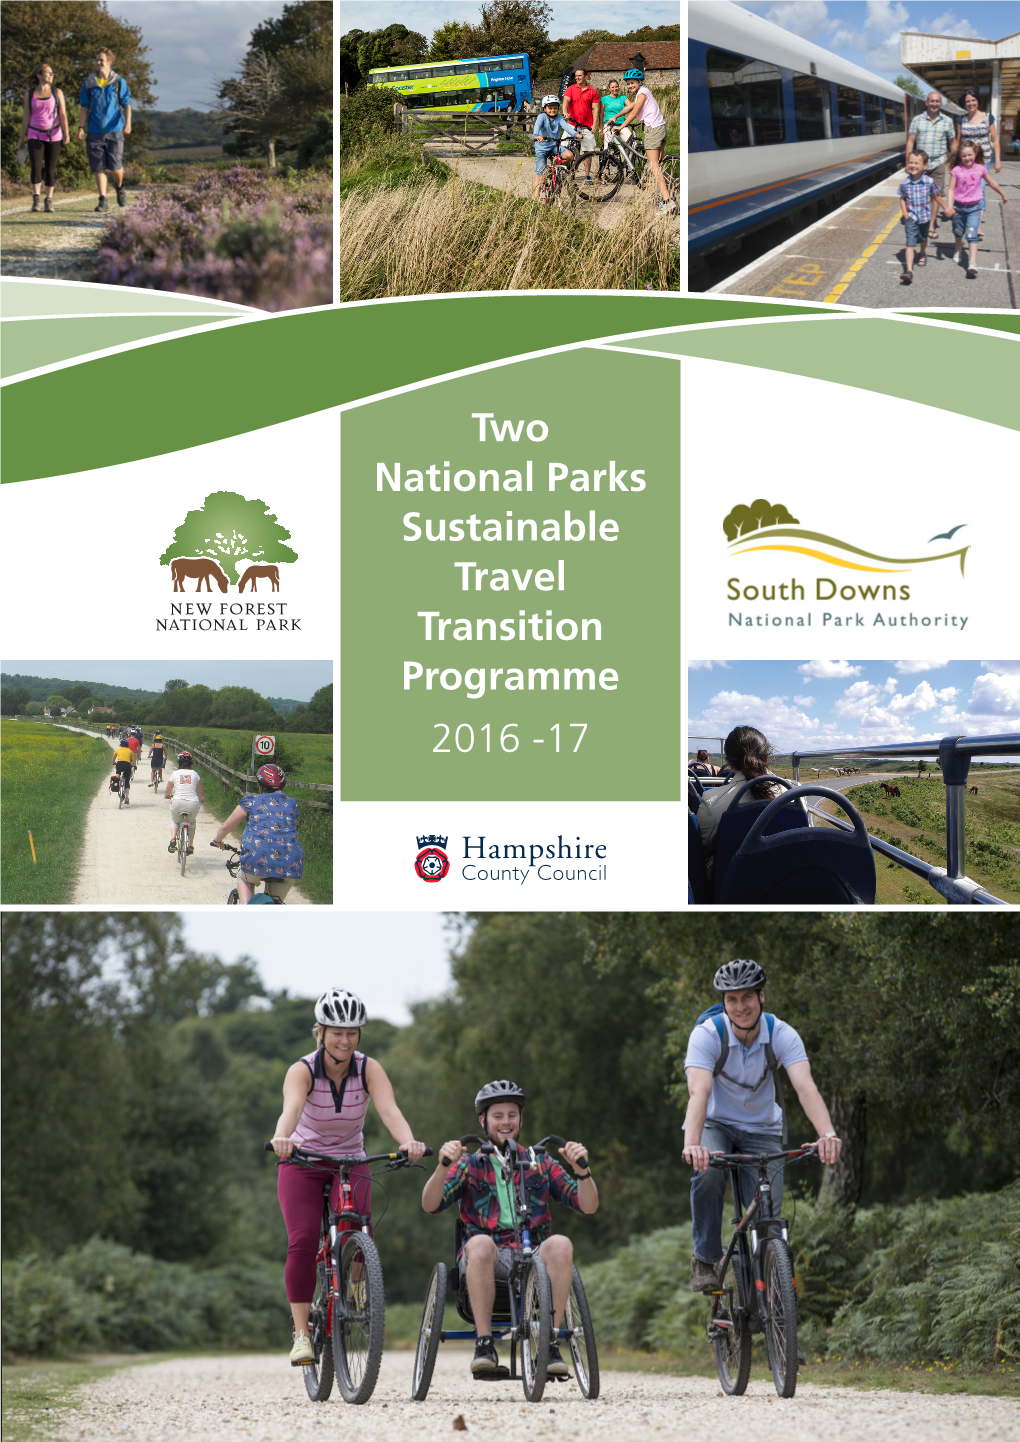 Two National Parks Sustainable Travel Transition Programme 2016 -17